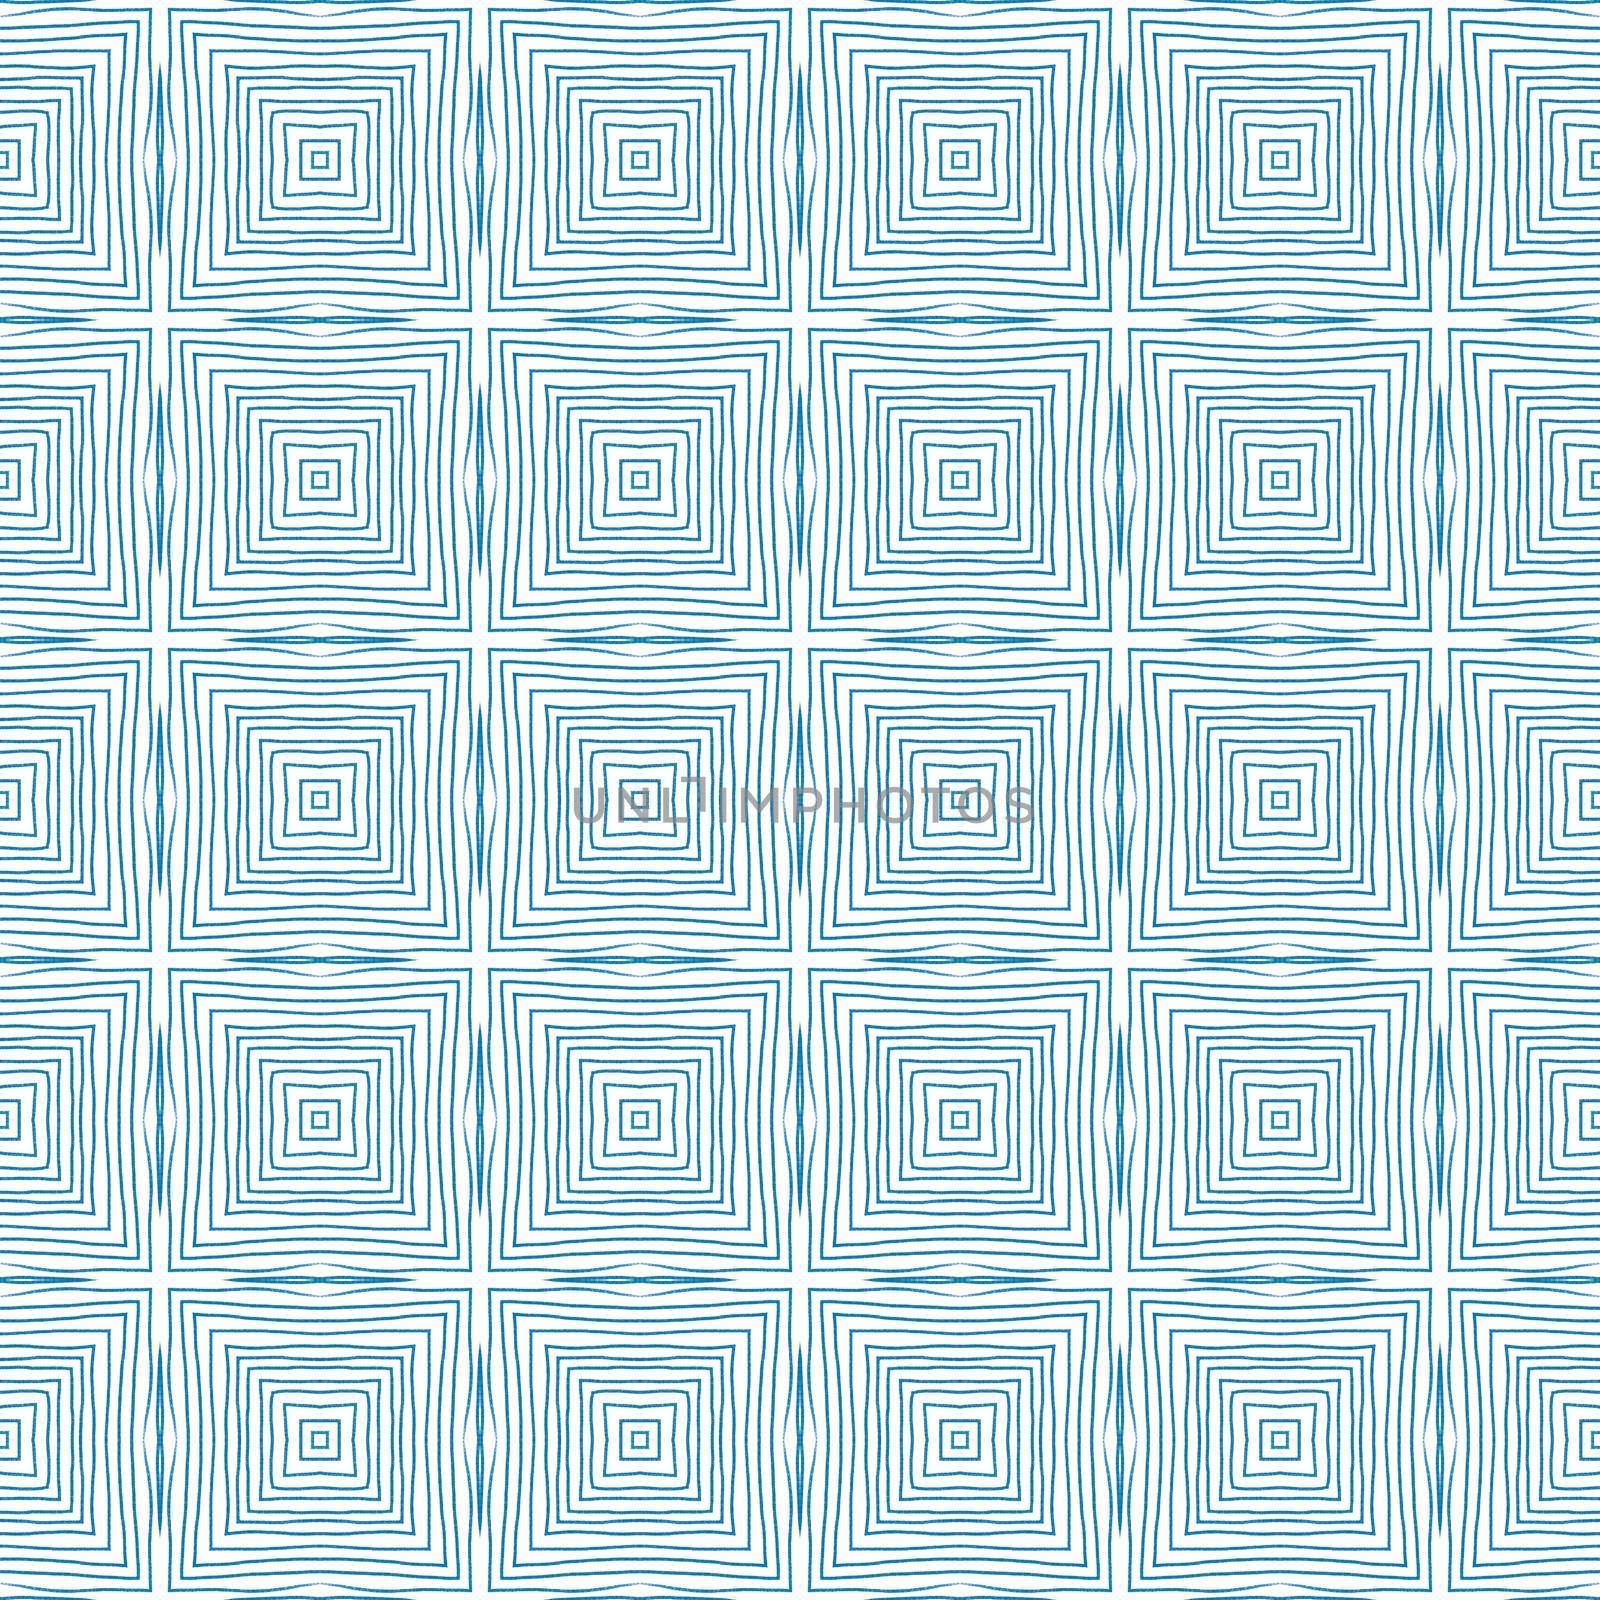 Ethnic hand painted pattern. Blue symmetrical kaleidoscope background. Summer dress ethnic hand painted tile. Textile ready divine print, swimwear fabric, wallpaper, wrapping.